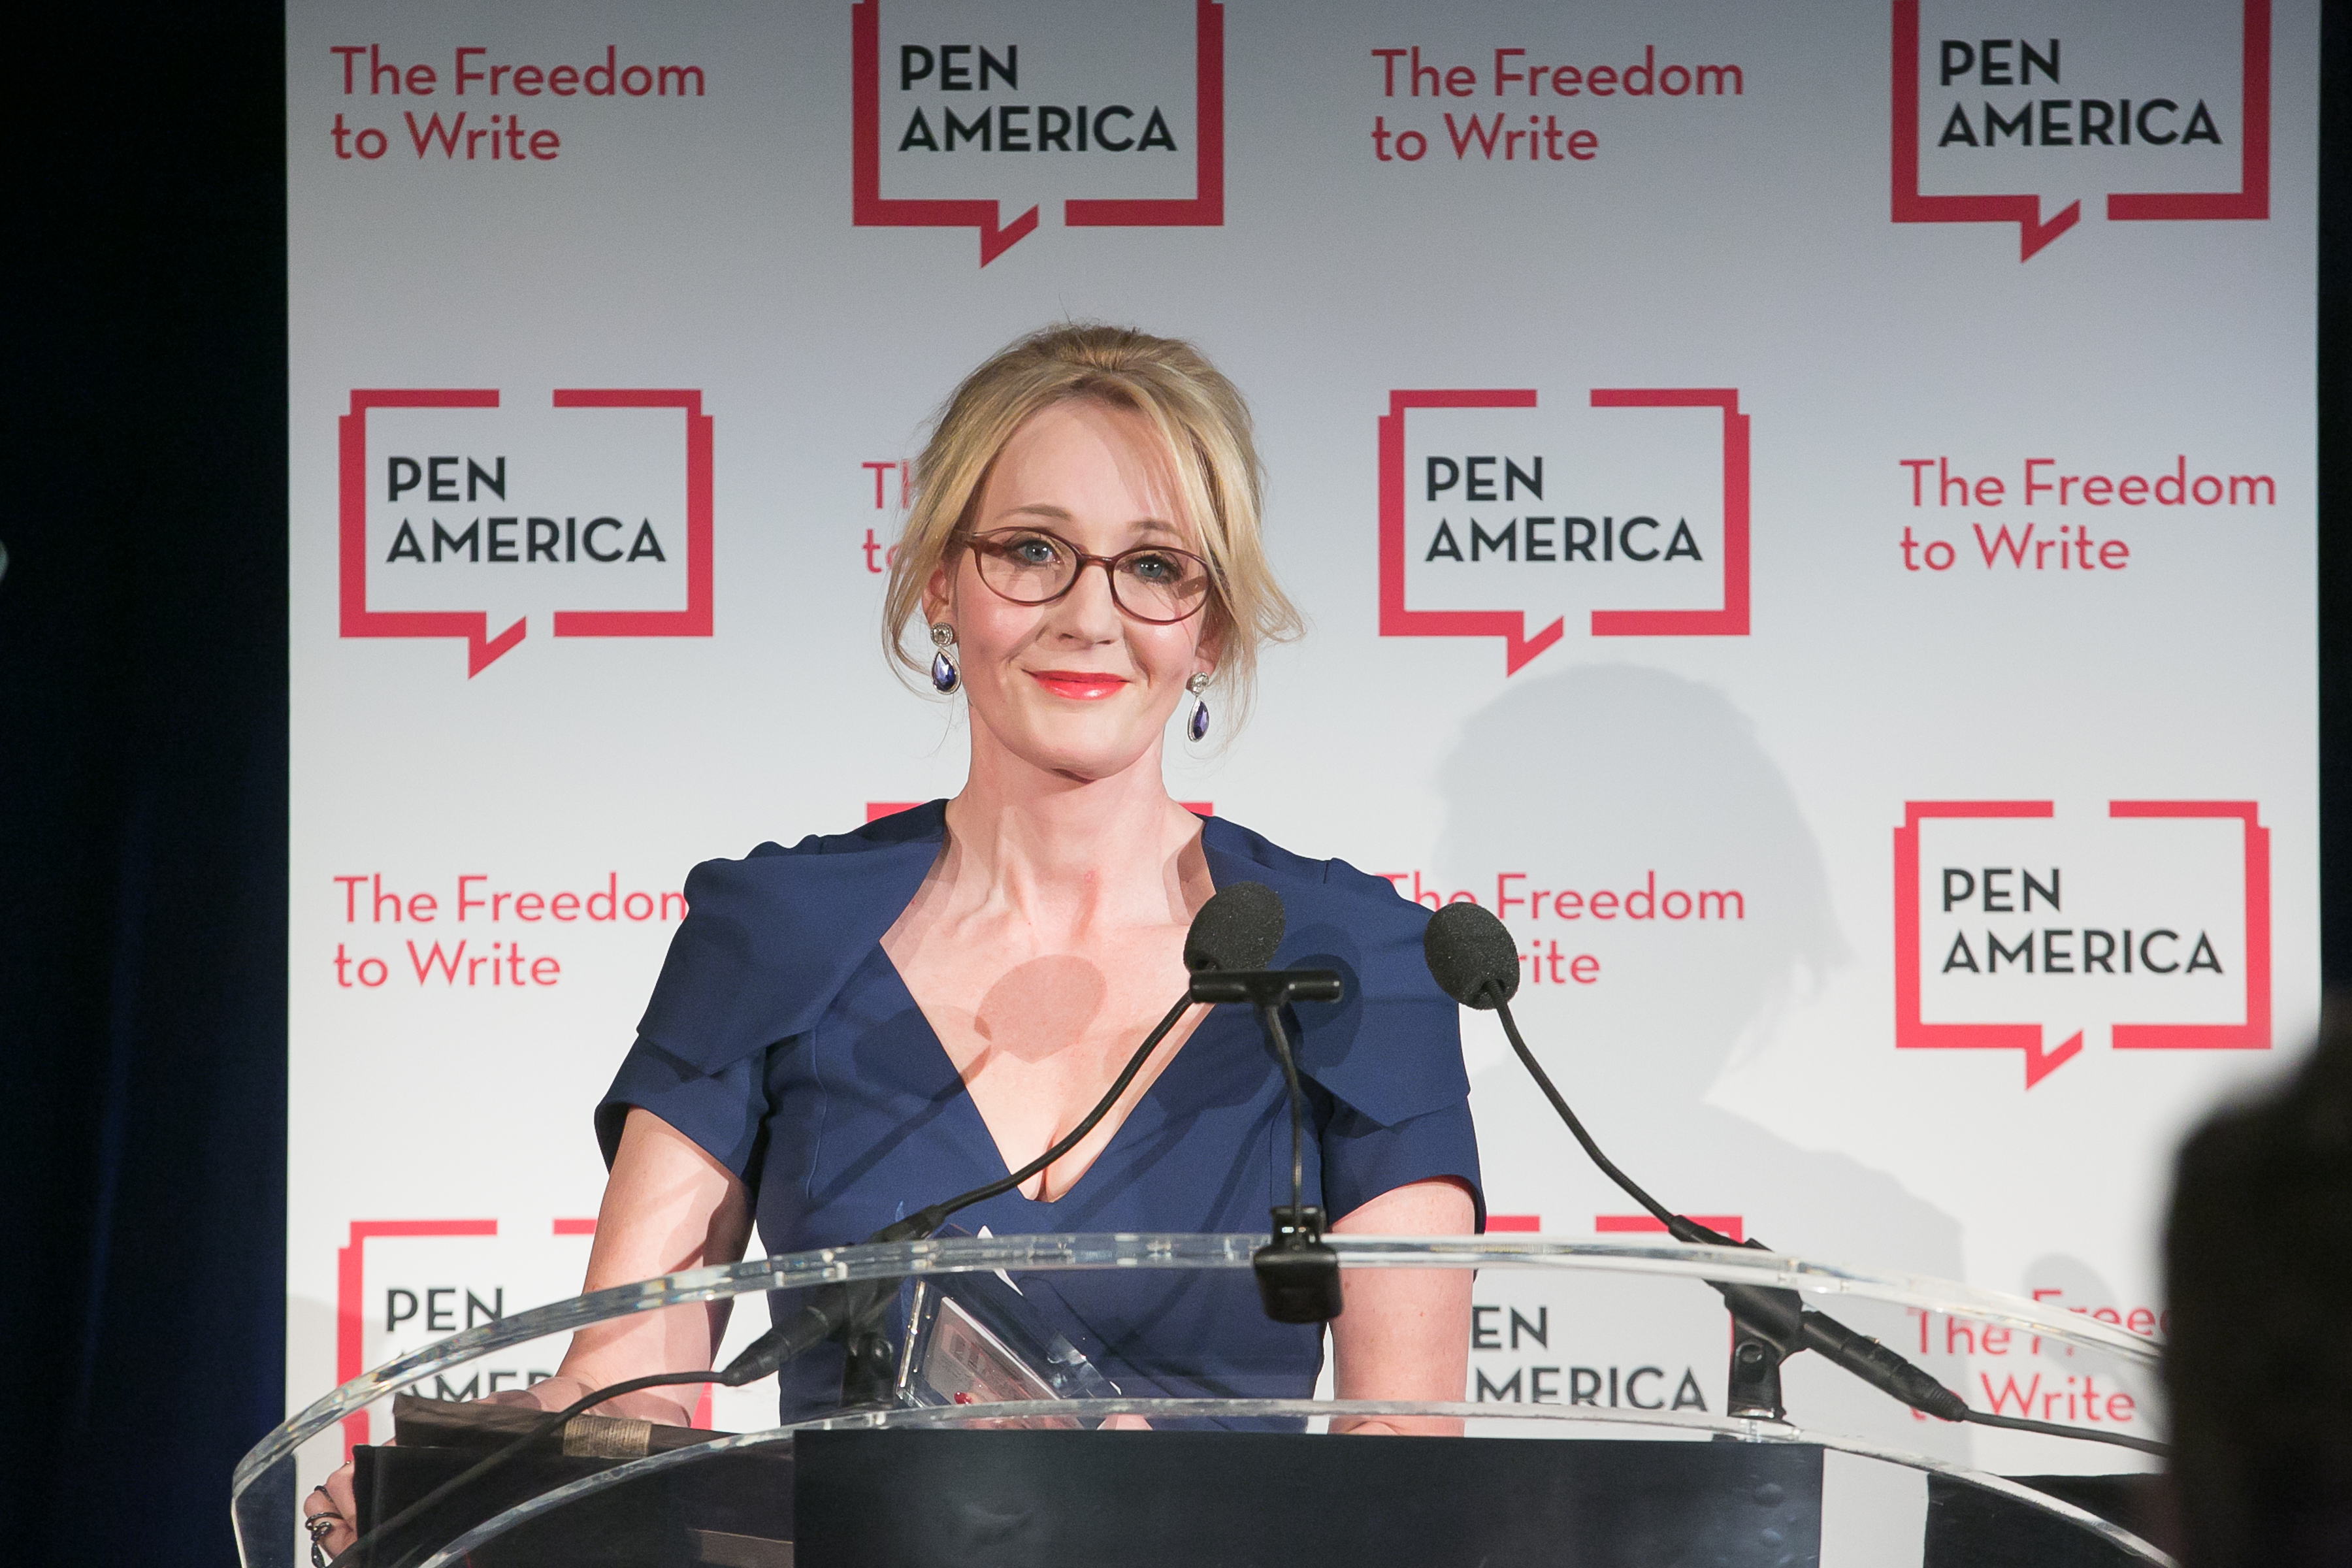 J.K. Rowling, Photo © Beowulf Sheehan/PEN America. Creative Commons NOT permitted. Contact media@pen.org for permissions & usage not associated with 2016 Literary Gala editorial.